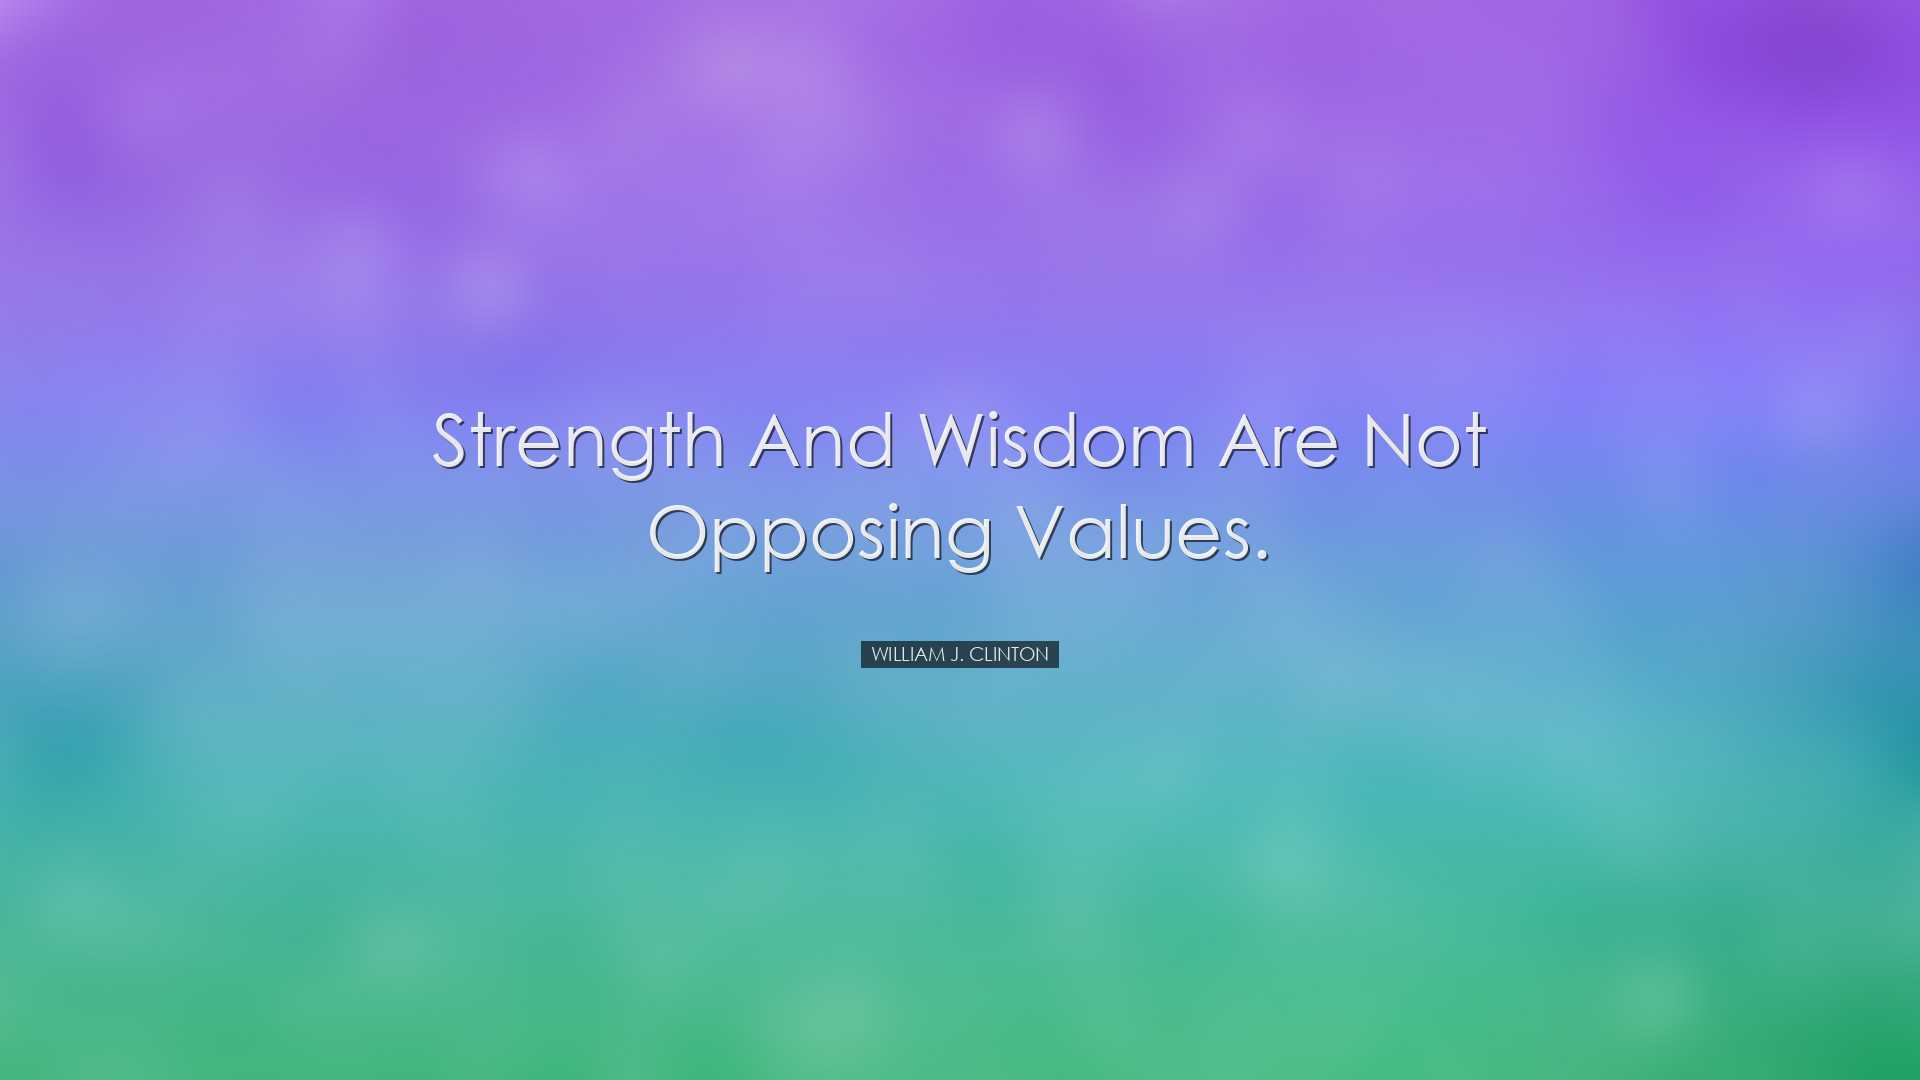 Strength and wisdom are not opposing values. - William J. Clinton